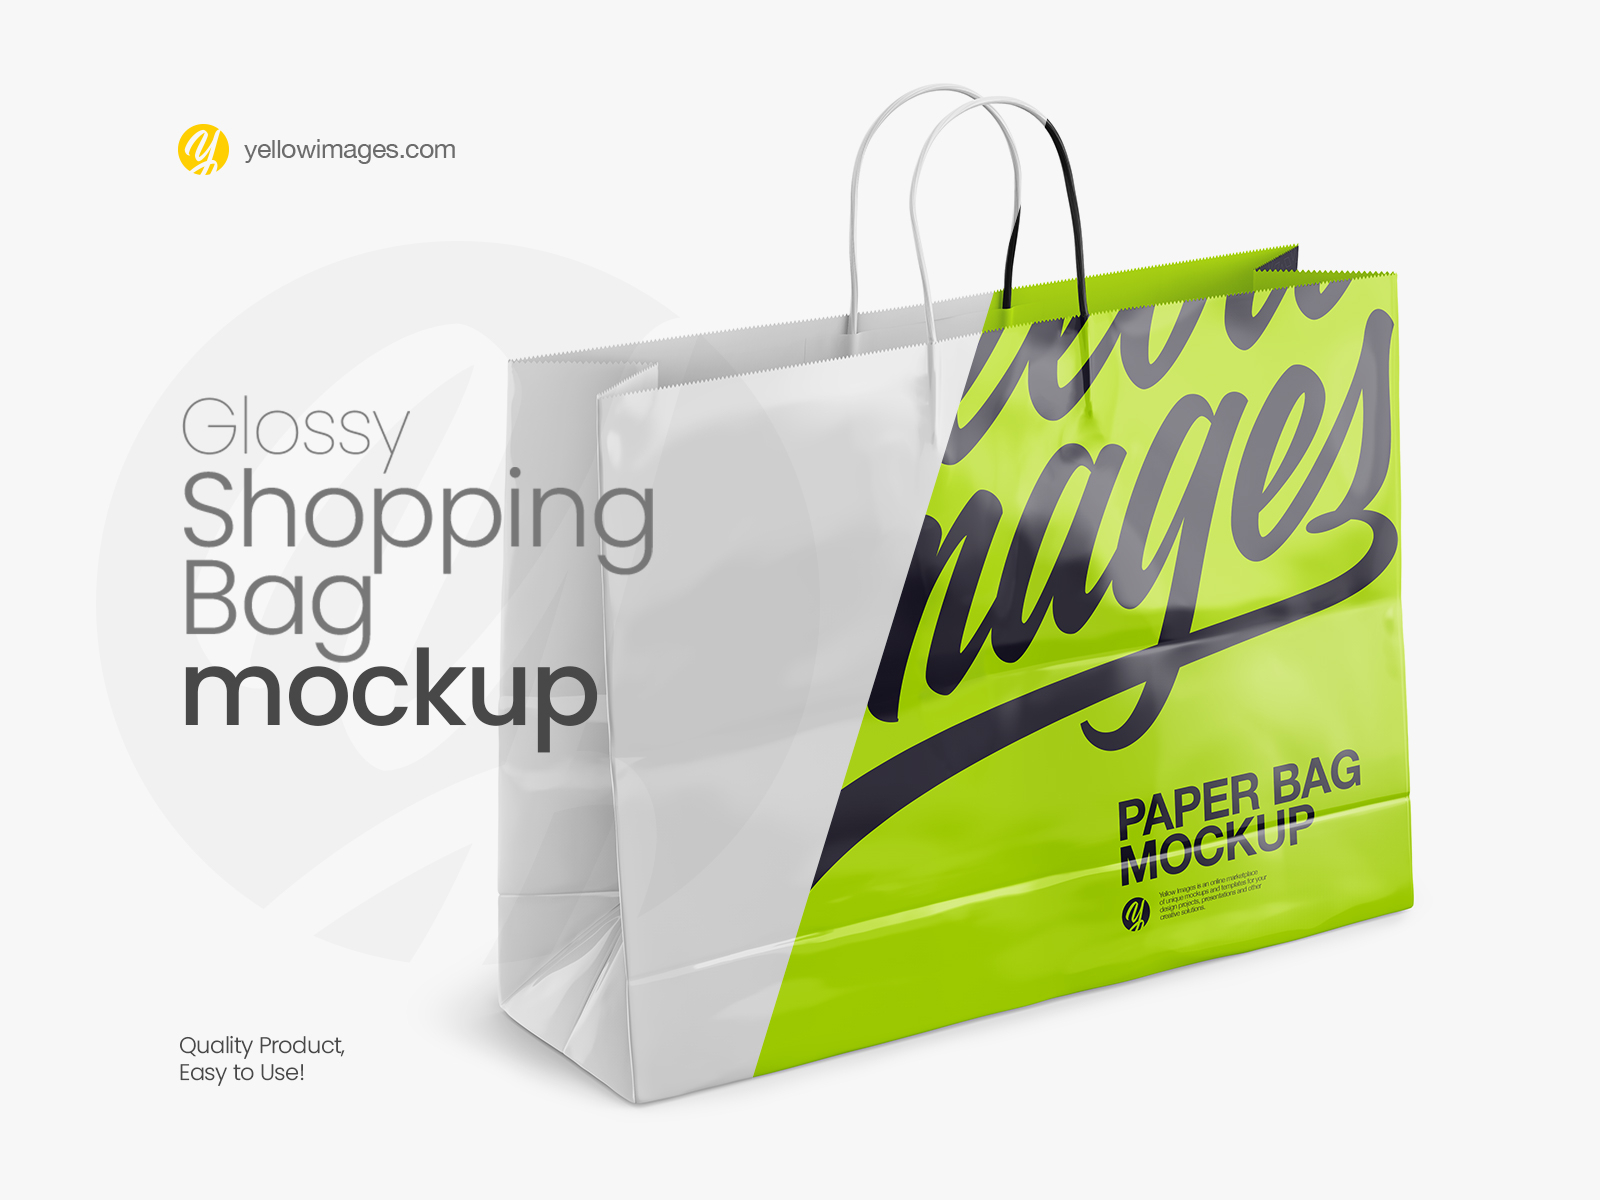 Download Packaging Sticker Mockup Download Free And Premium Psd Mockup Templates And Design Assets Yellowimages Mockups